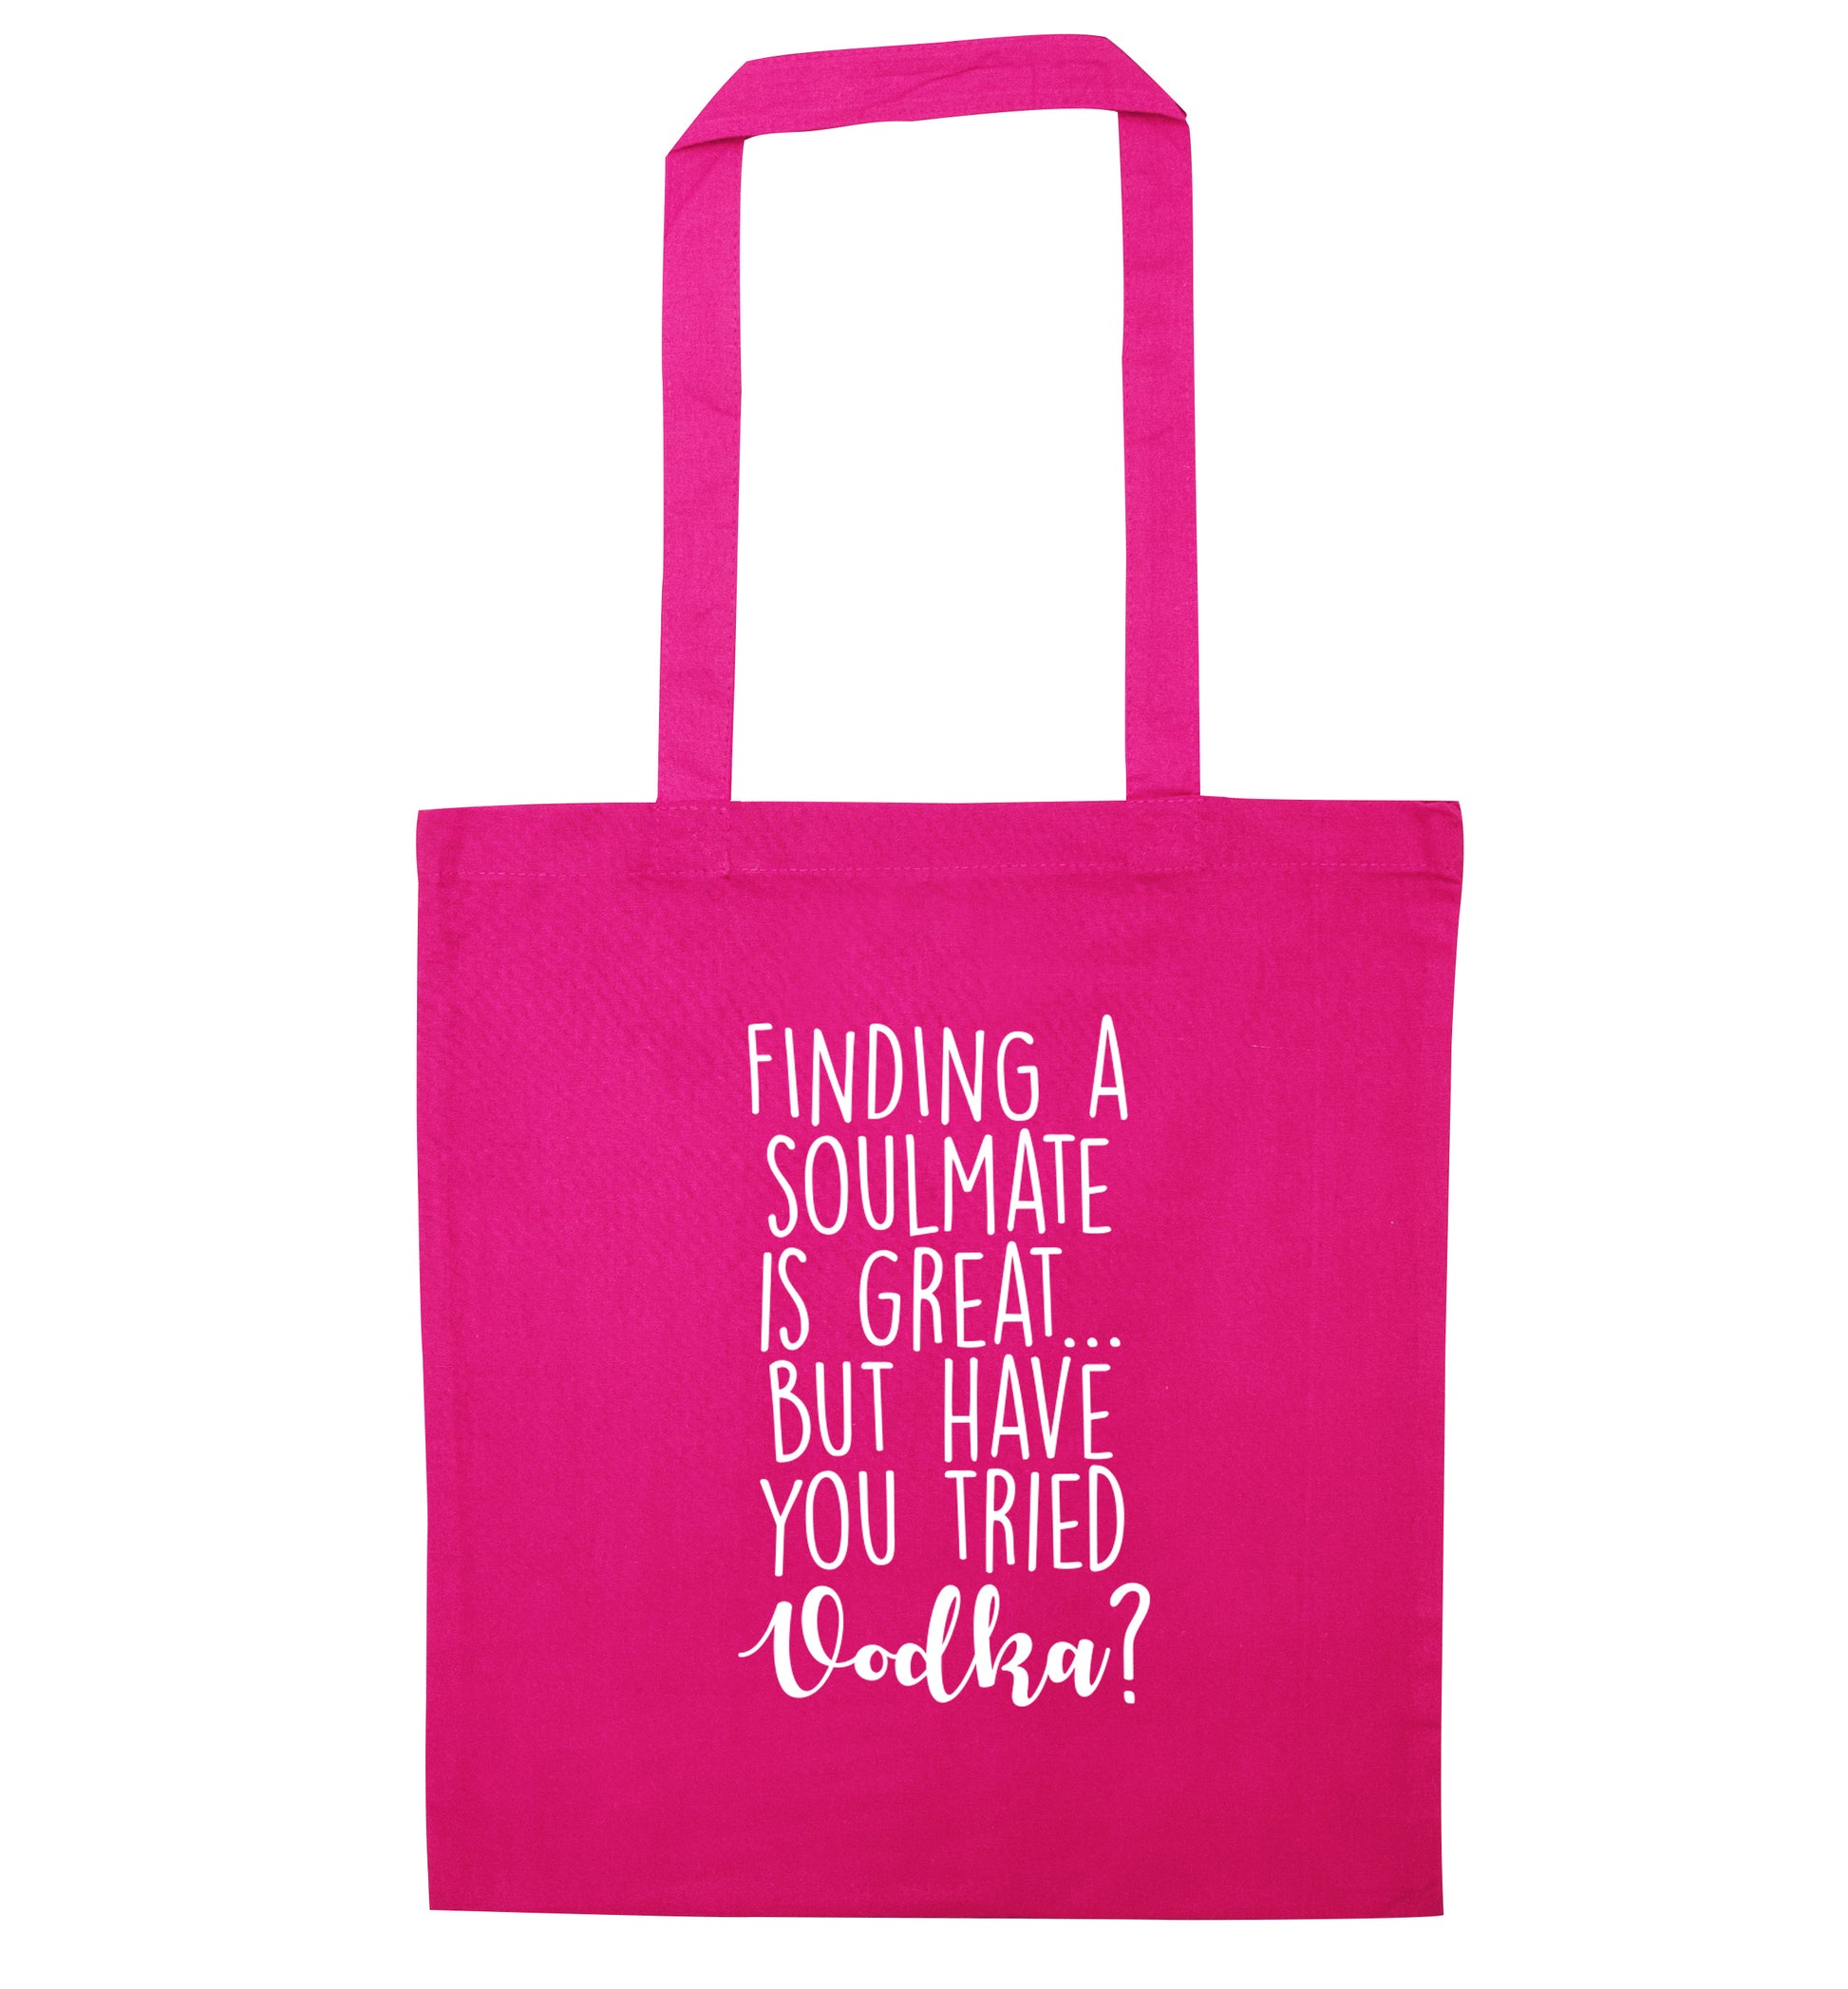 Finding a soulmate is great but have you tried vodka? pink tote bag